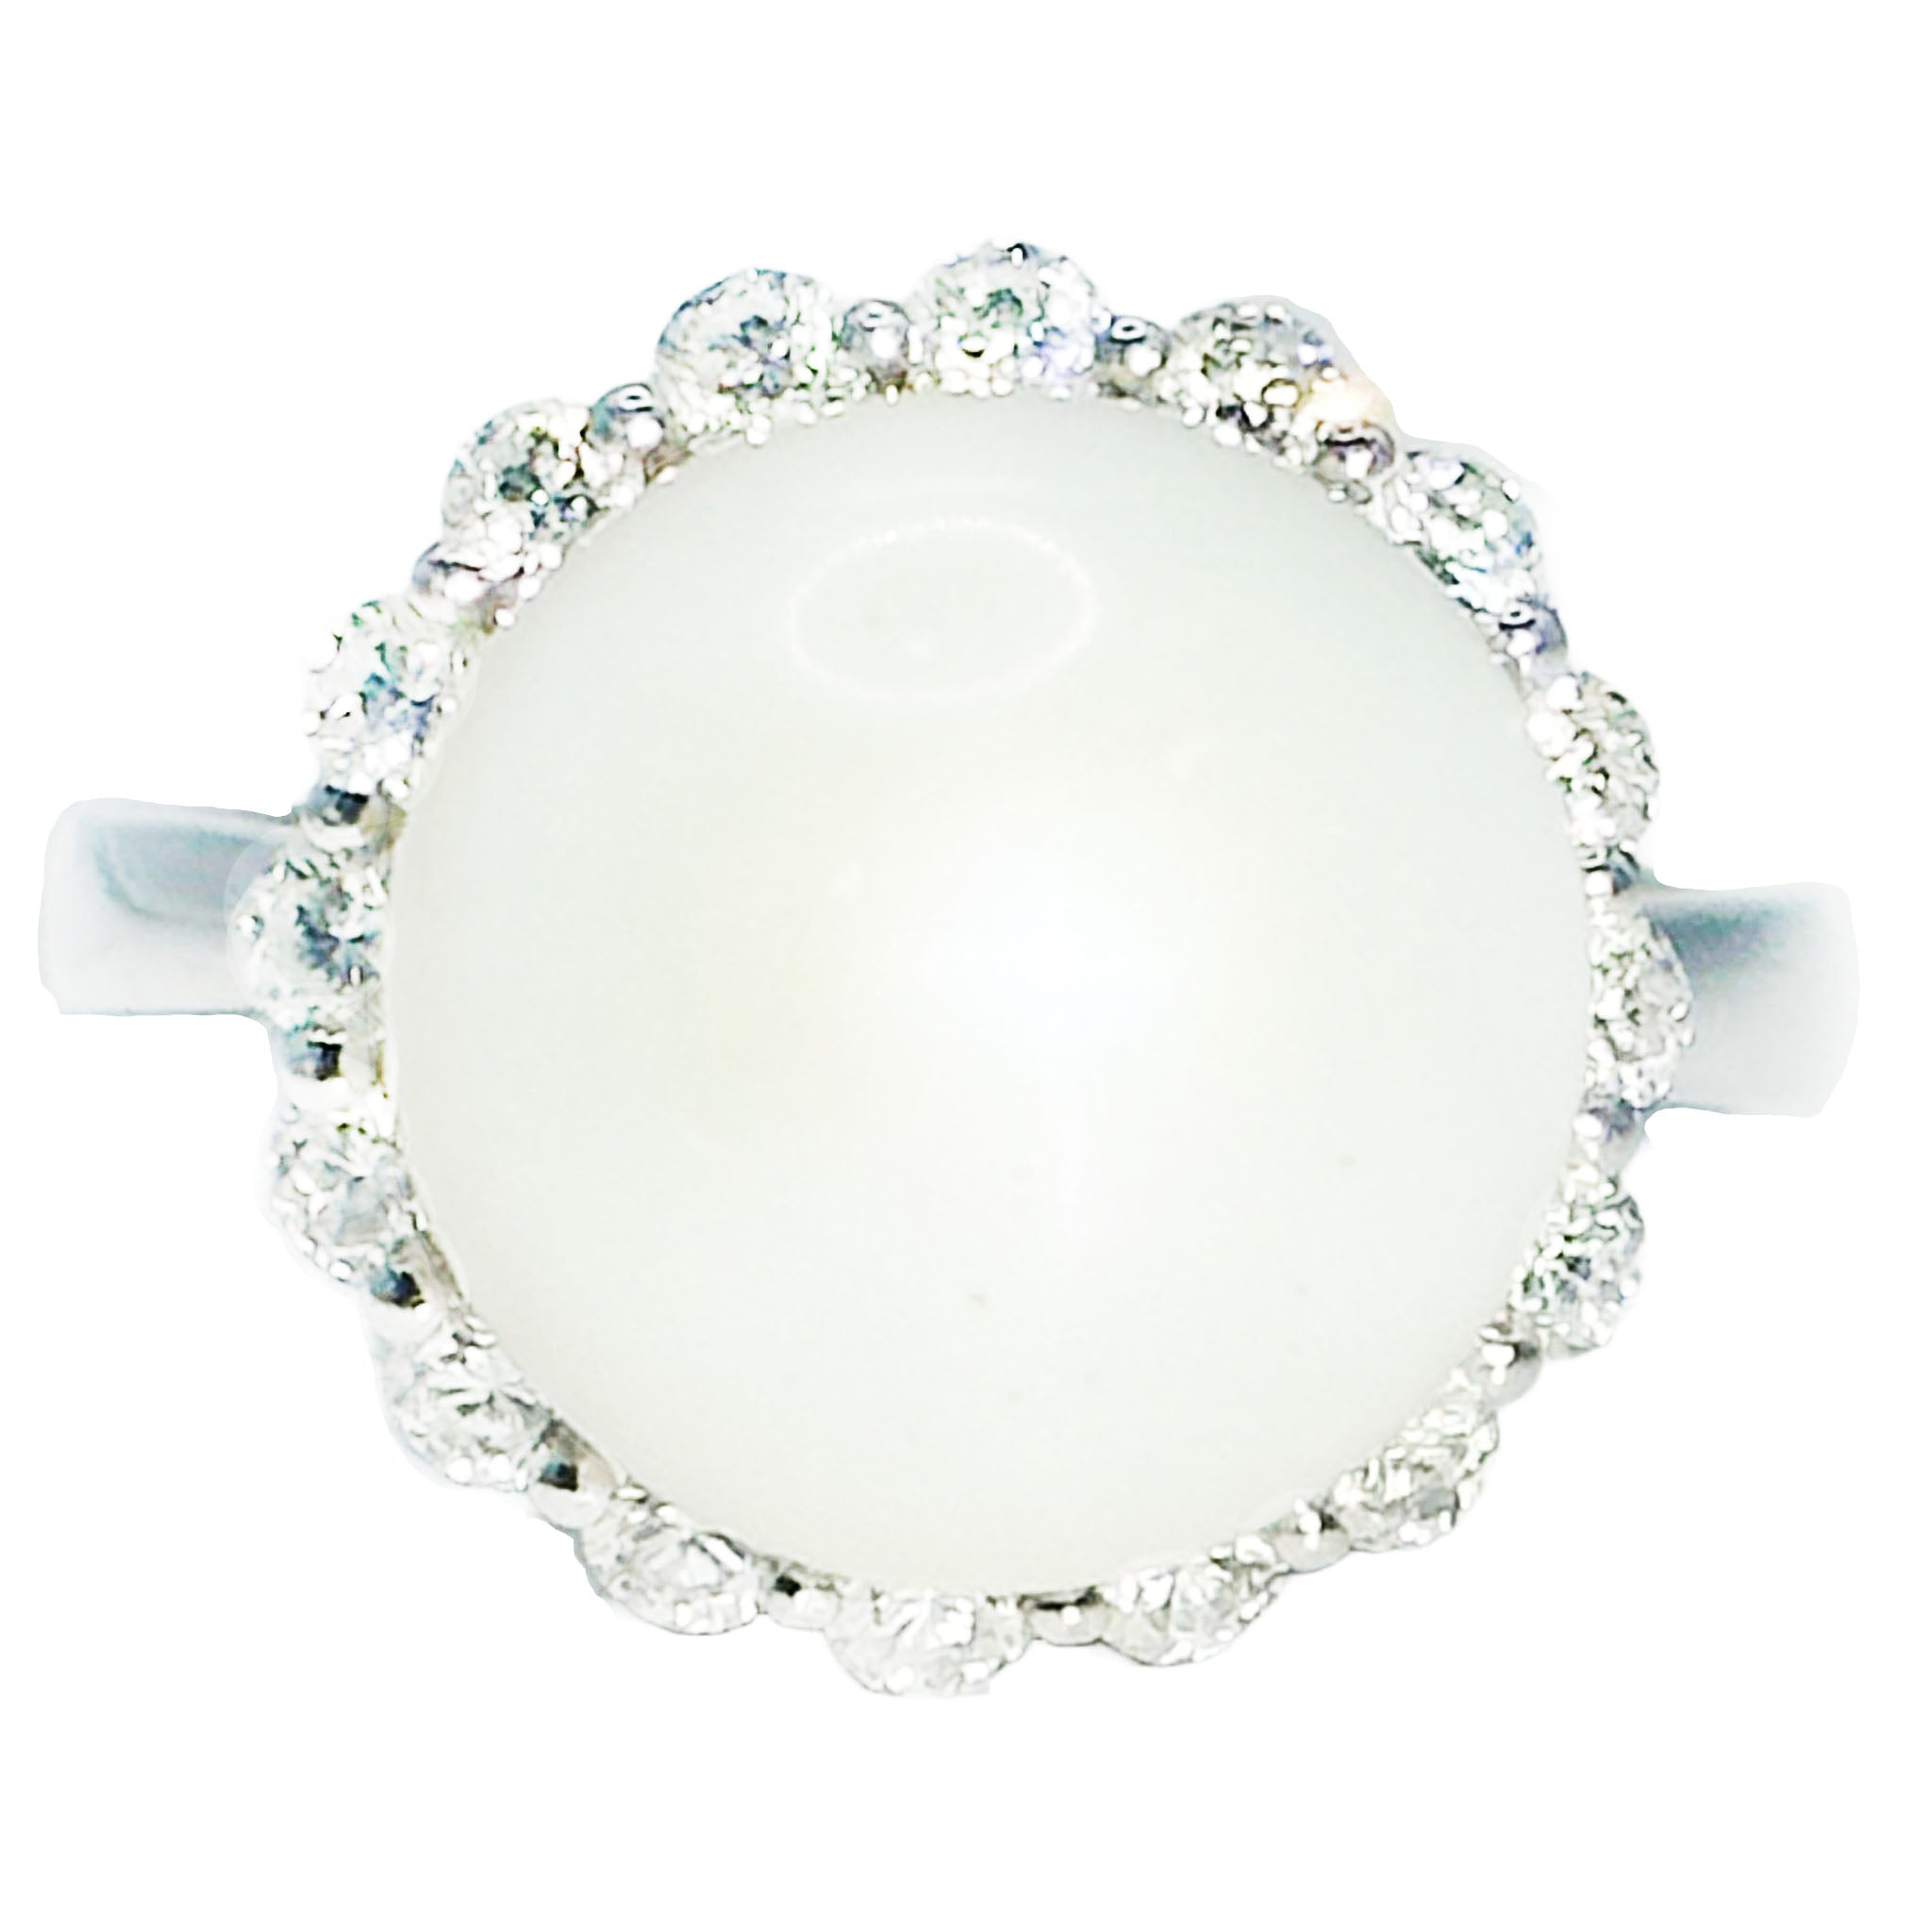 $7900 .75 Ct White Gold South Sea White Pearl and Diamond All Around Ring 18Kt